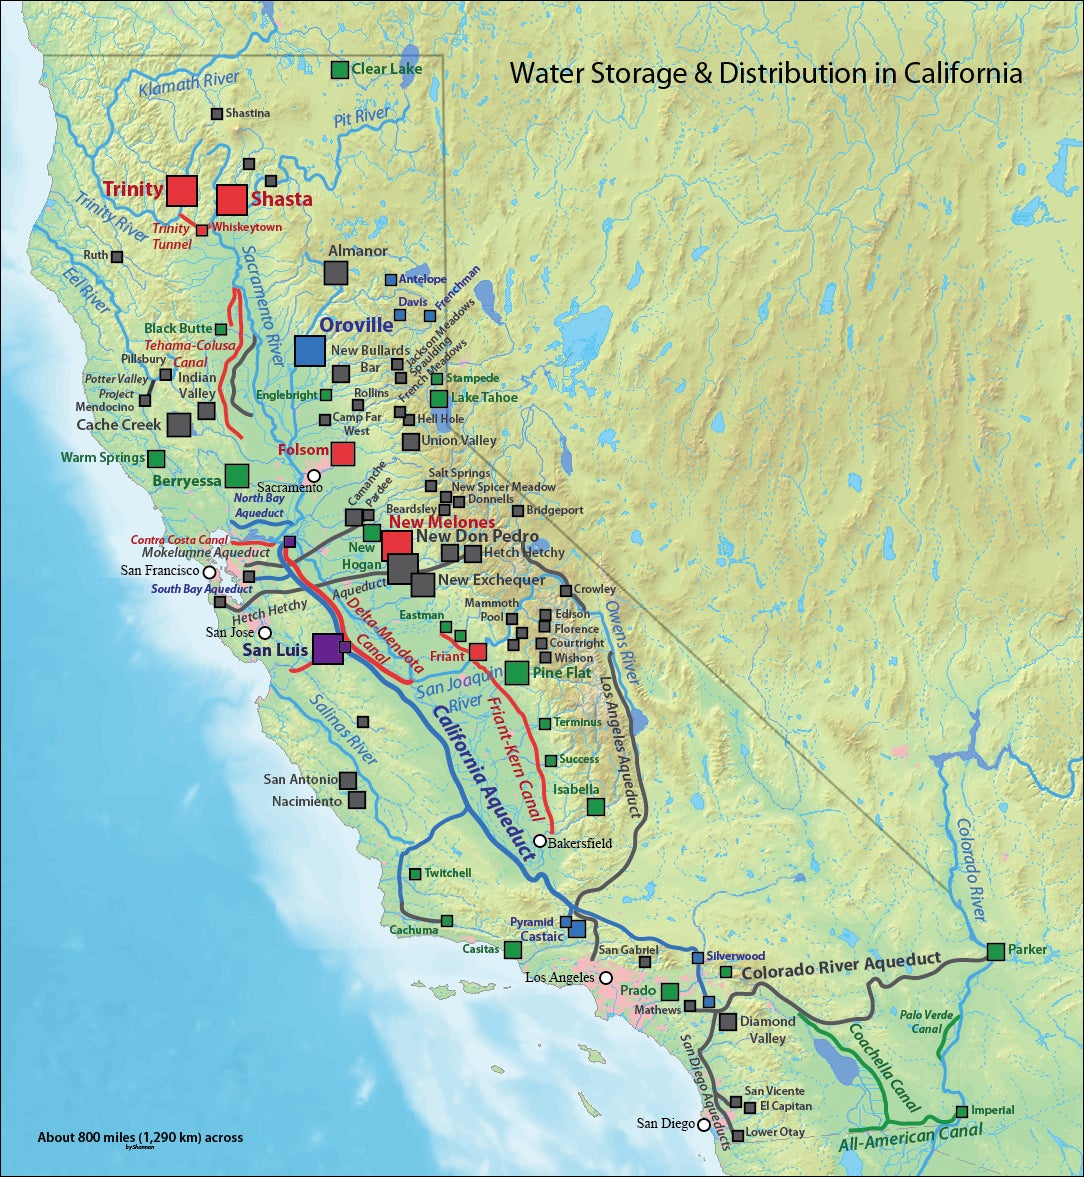 Figure 6: Water Infrastructure in California (Source: Shannon1 at English language Wikipedia; https://commons.wikimedia.org/ wiki/File:California_water_system.jpg)